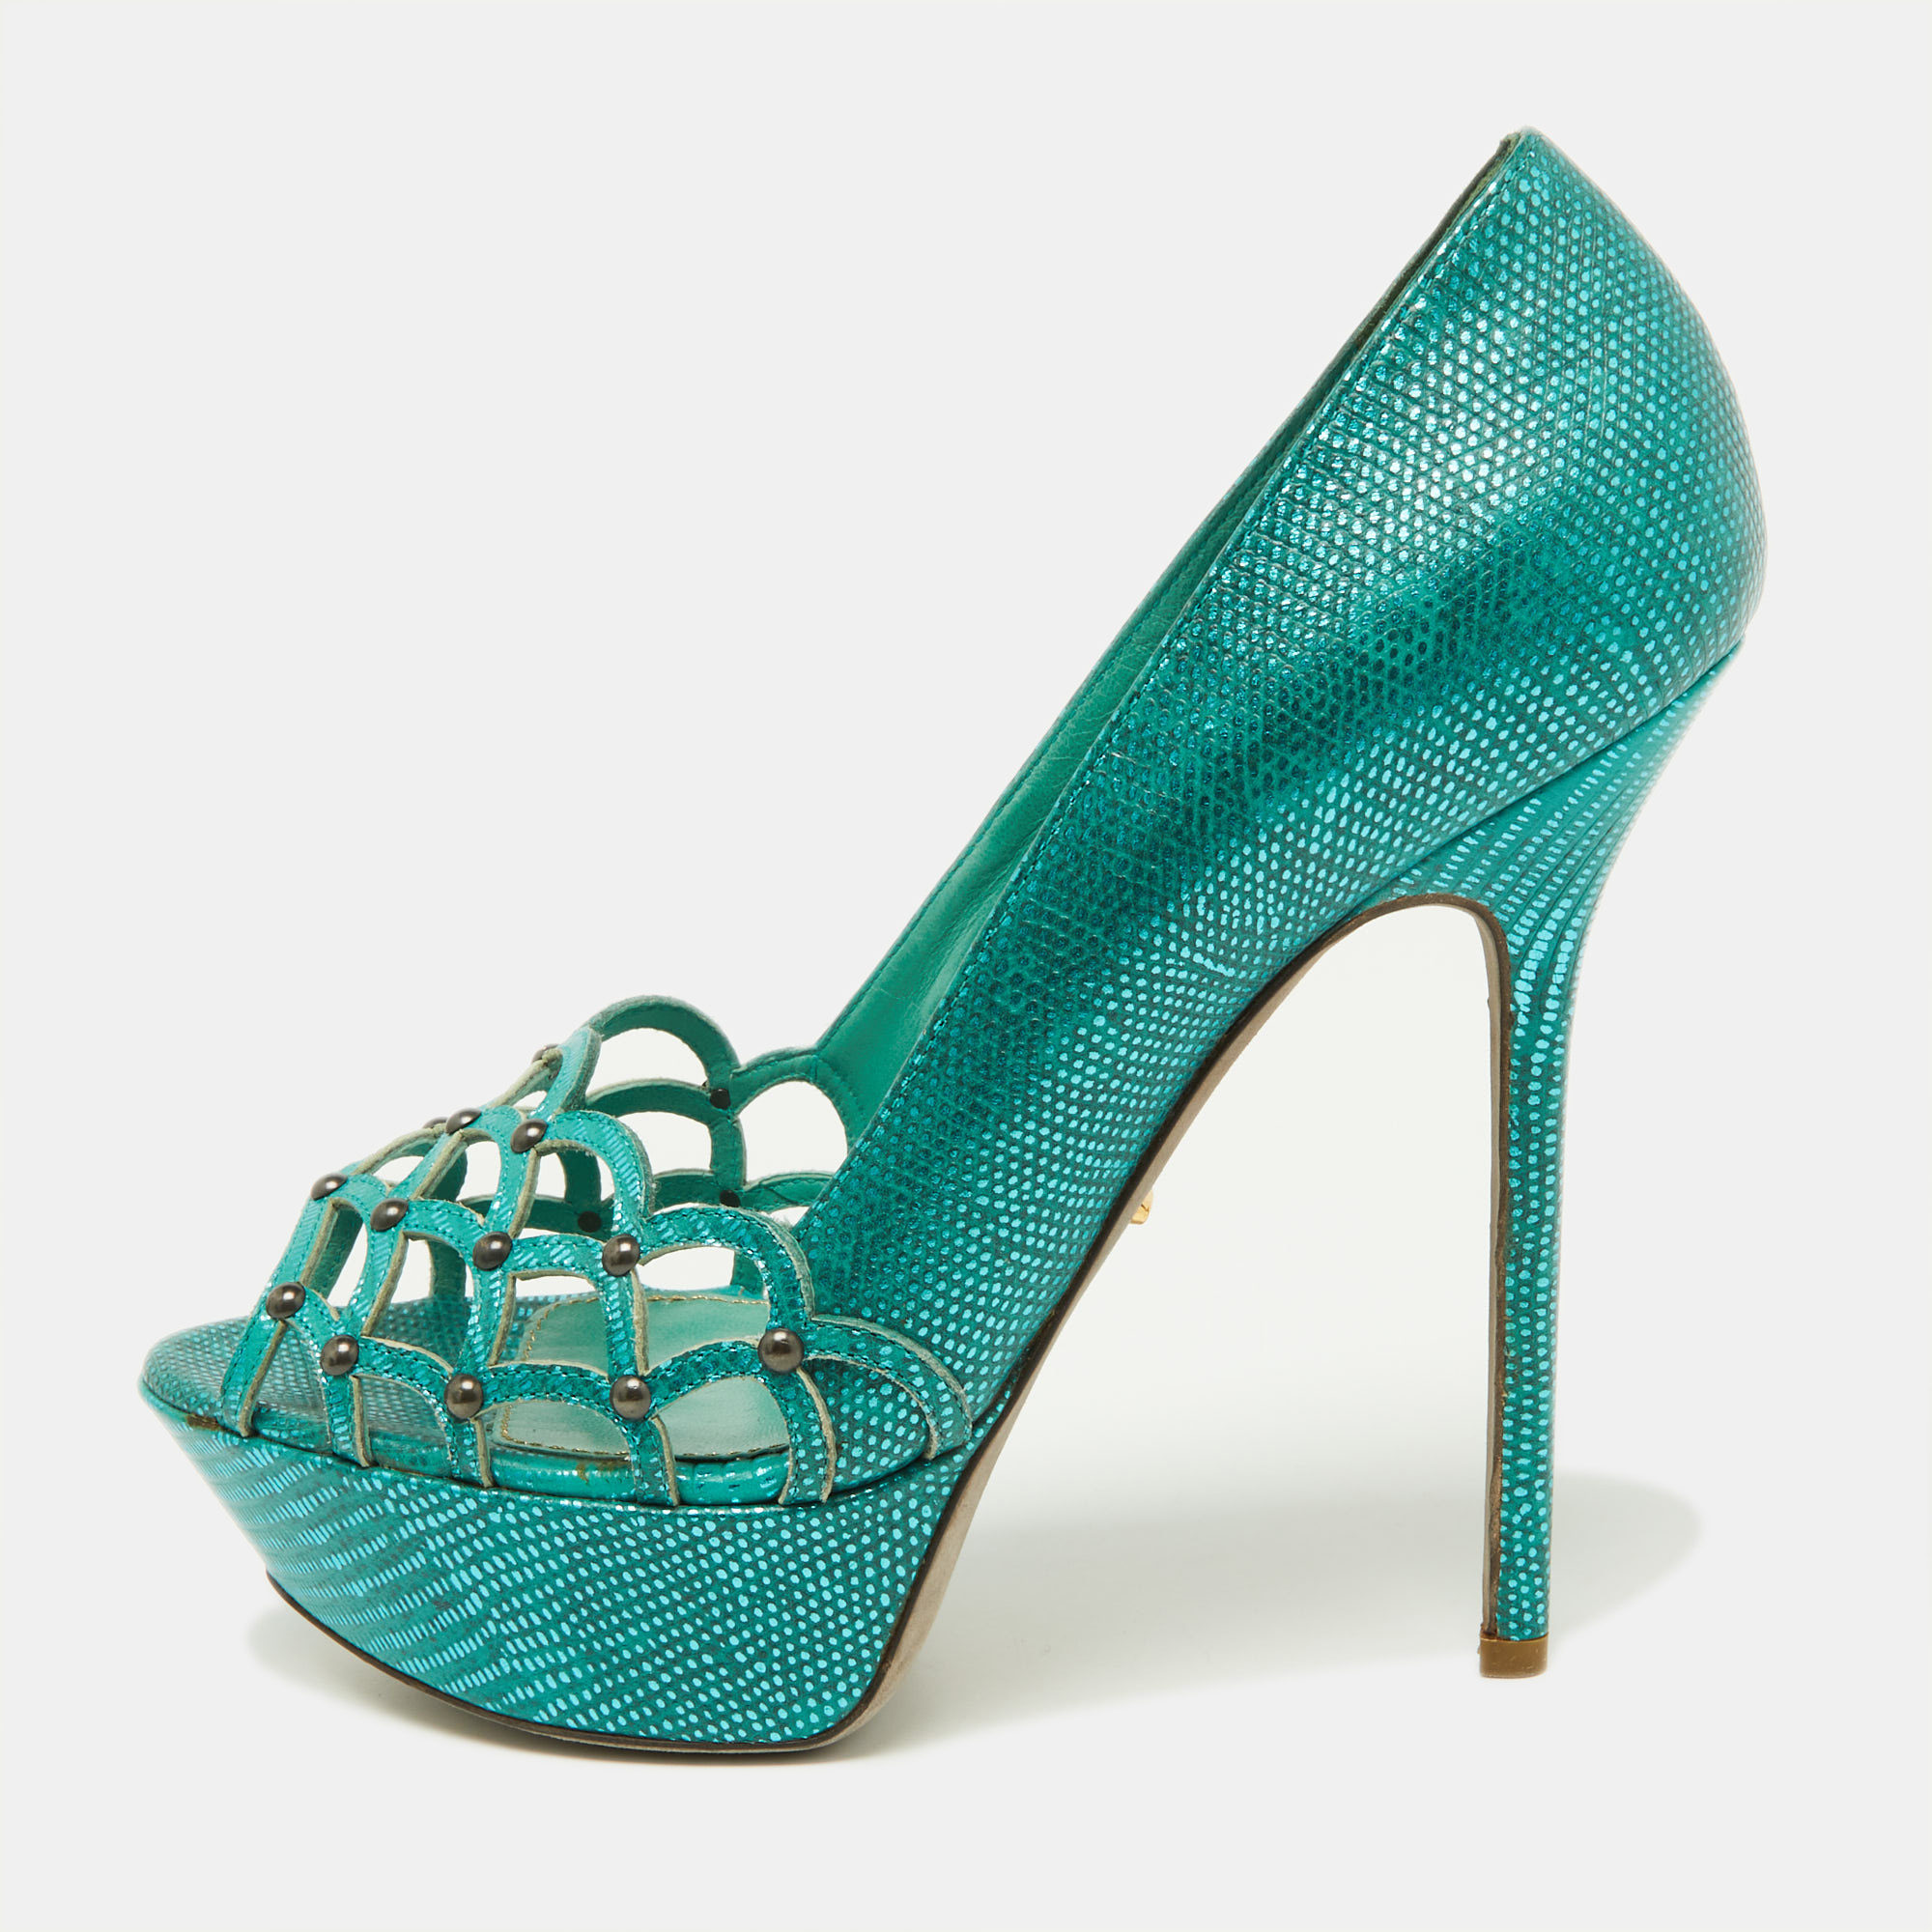 Pre-owned Sergio Rossi Green Laser Cut Lizard Embossed Leather Platform Pumps Size 38